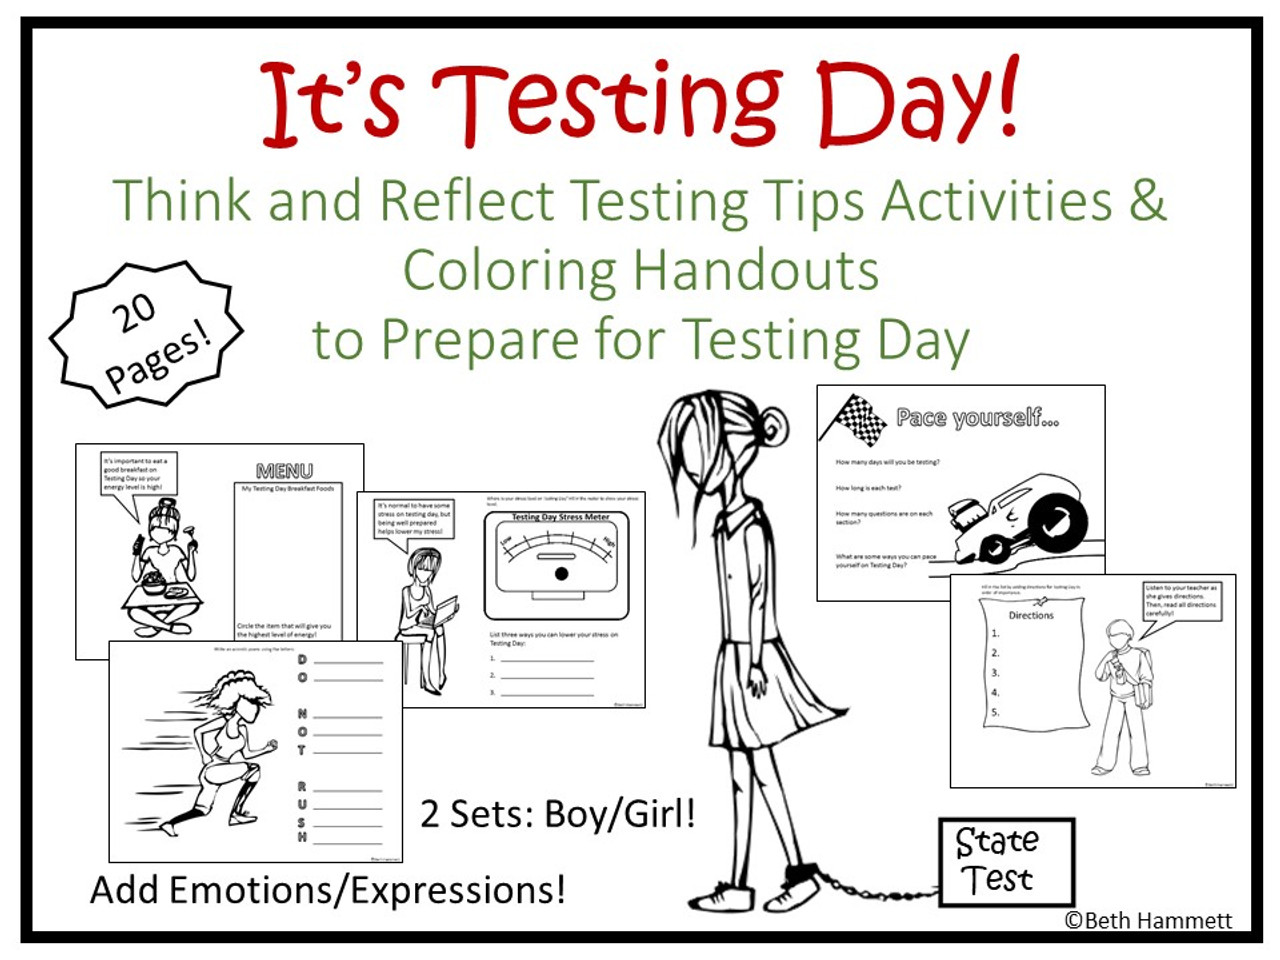 It's Testing Day!